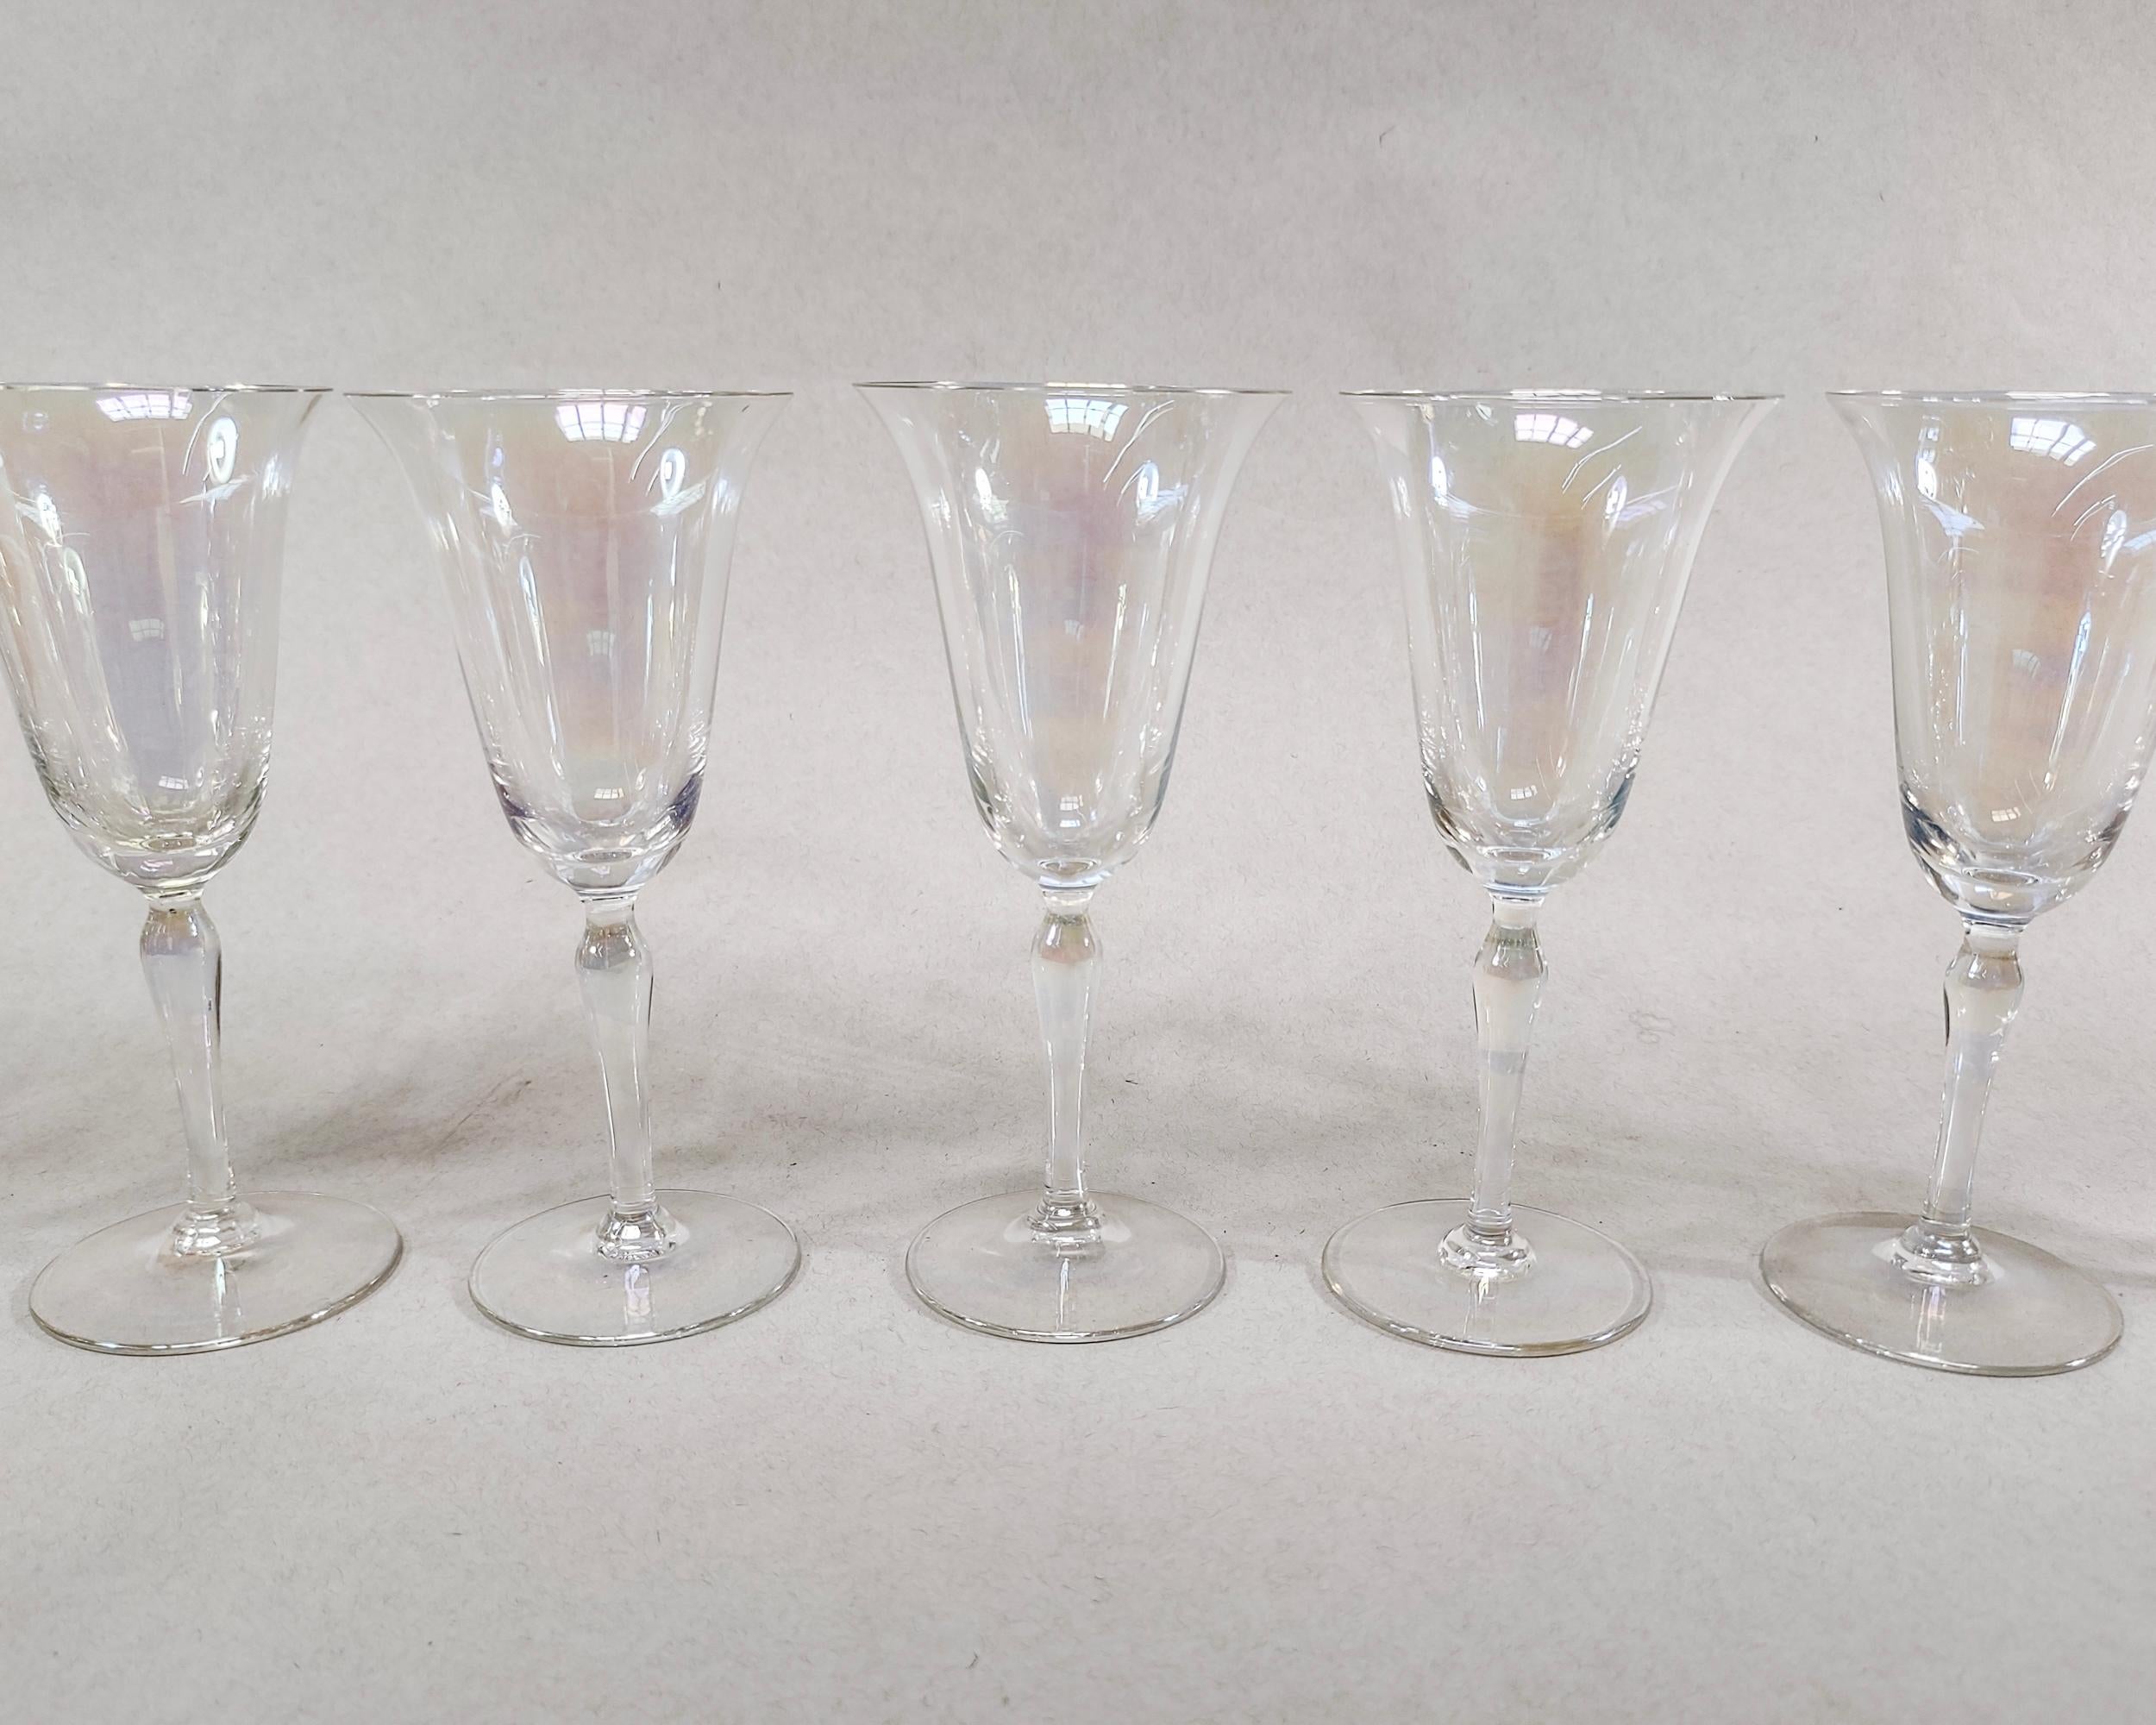 Set of 12 Vintage Hand Blown Iridescent Luster Tulip Wine Glasses 1930s In Good Condition For Sale In Hawthorne, CA